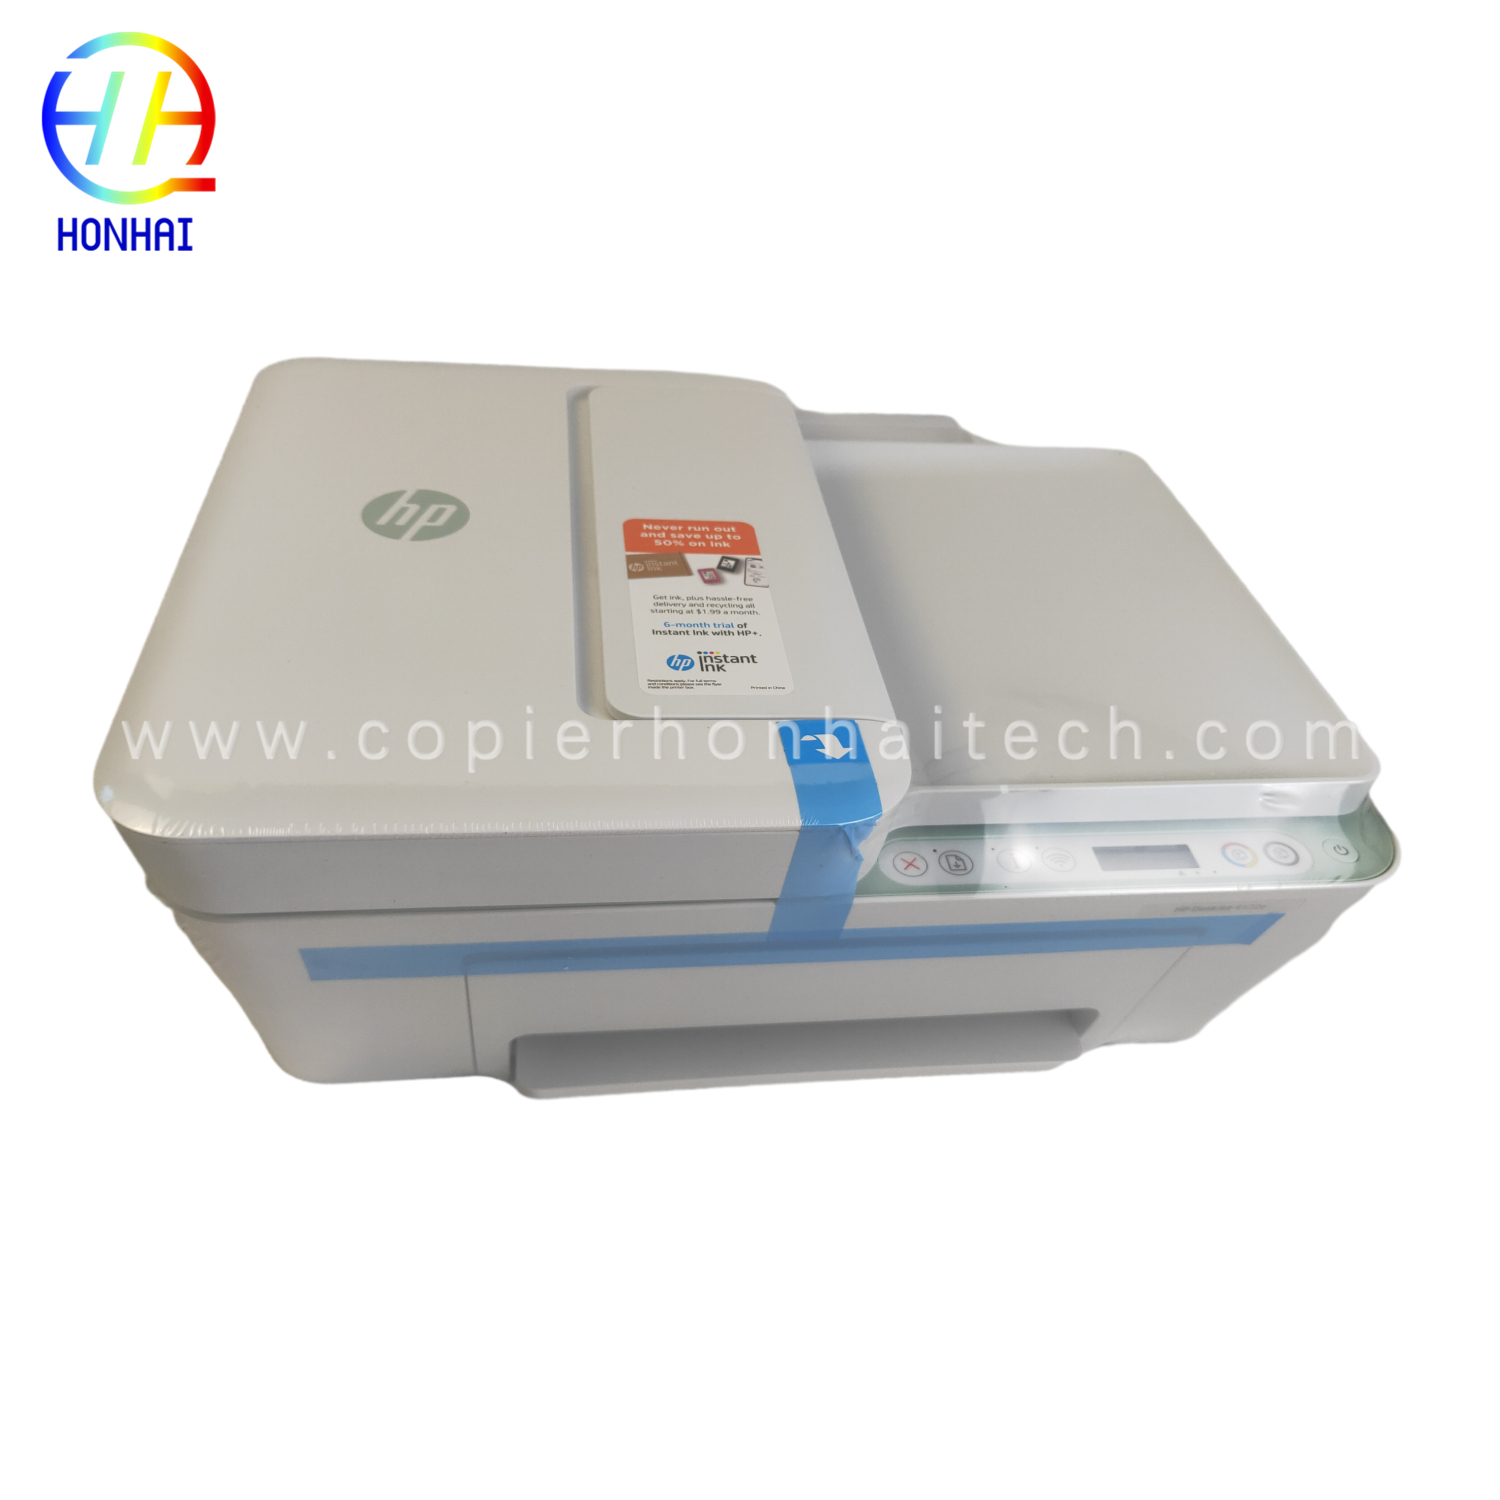 https://www.copierhonhaitech.com/original-new-wireless-printer-for-hp-deskjet-4122e-all-in-one-printer-scan-and-copy-home-office-students-and-home-printer-26q96a-product/